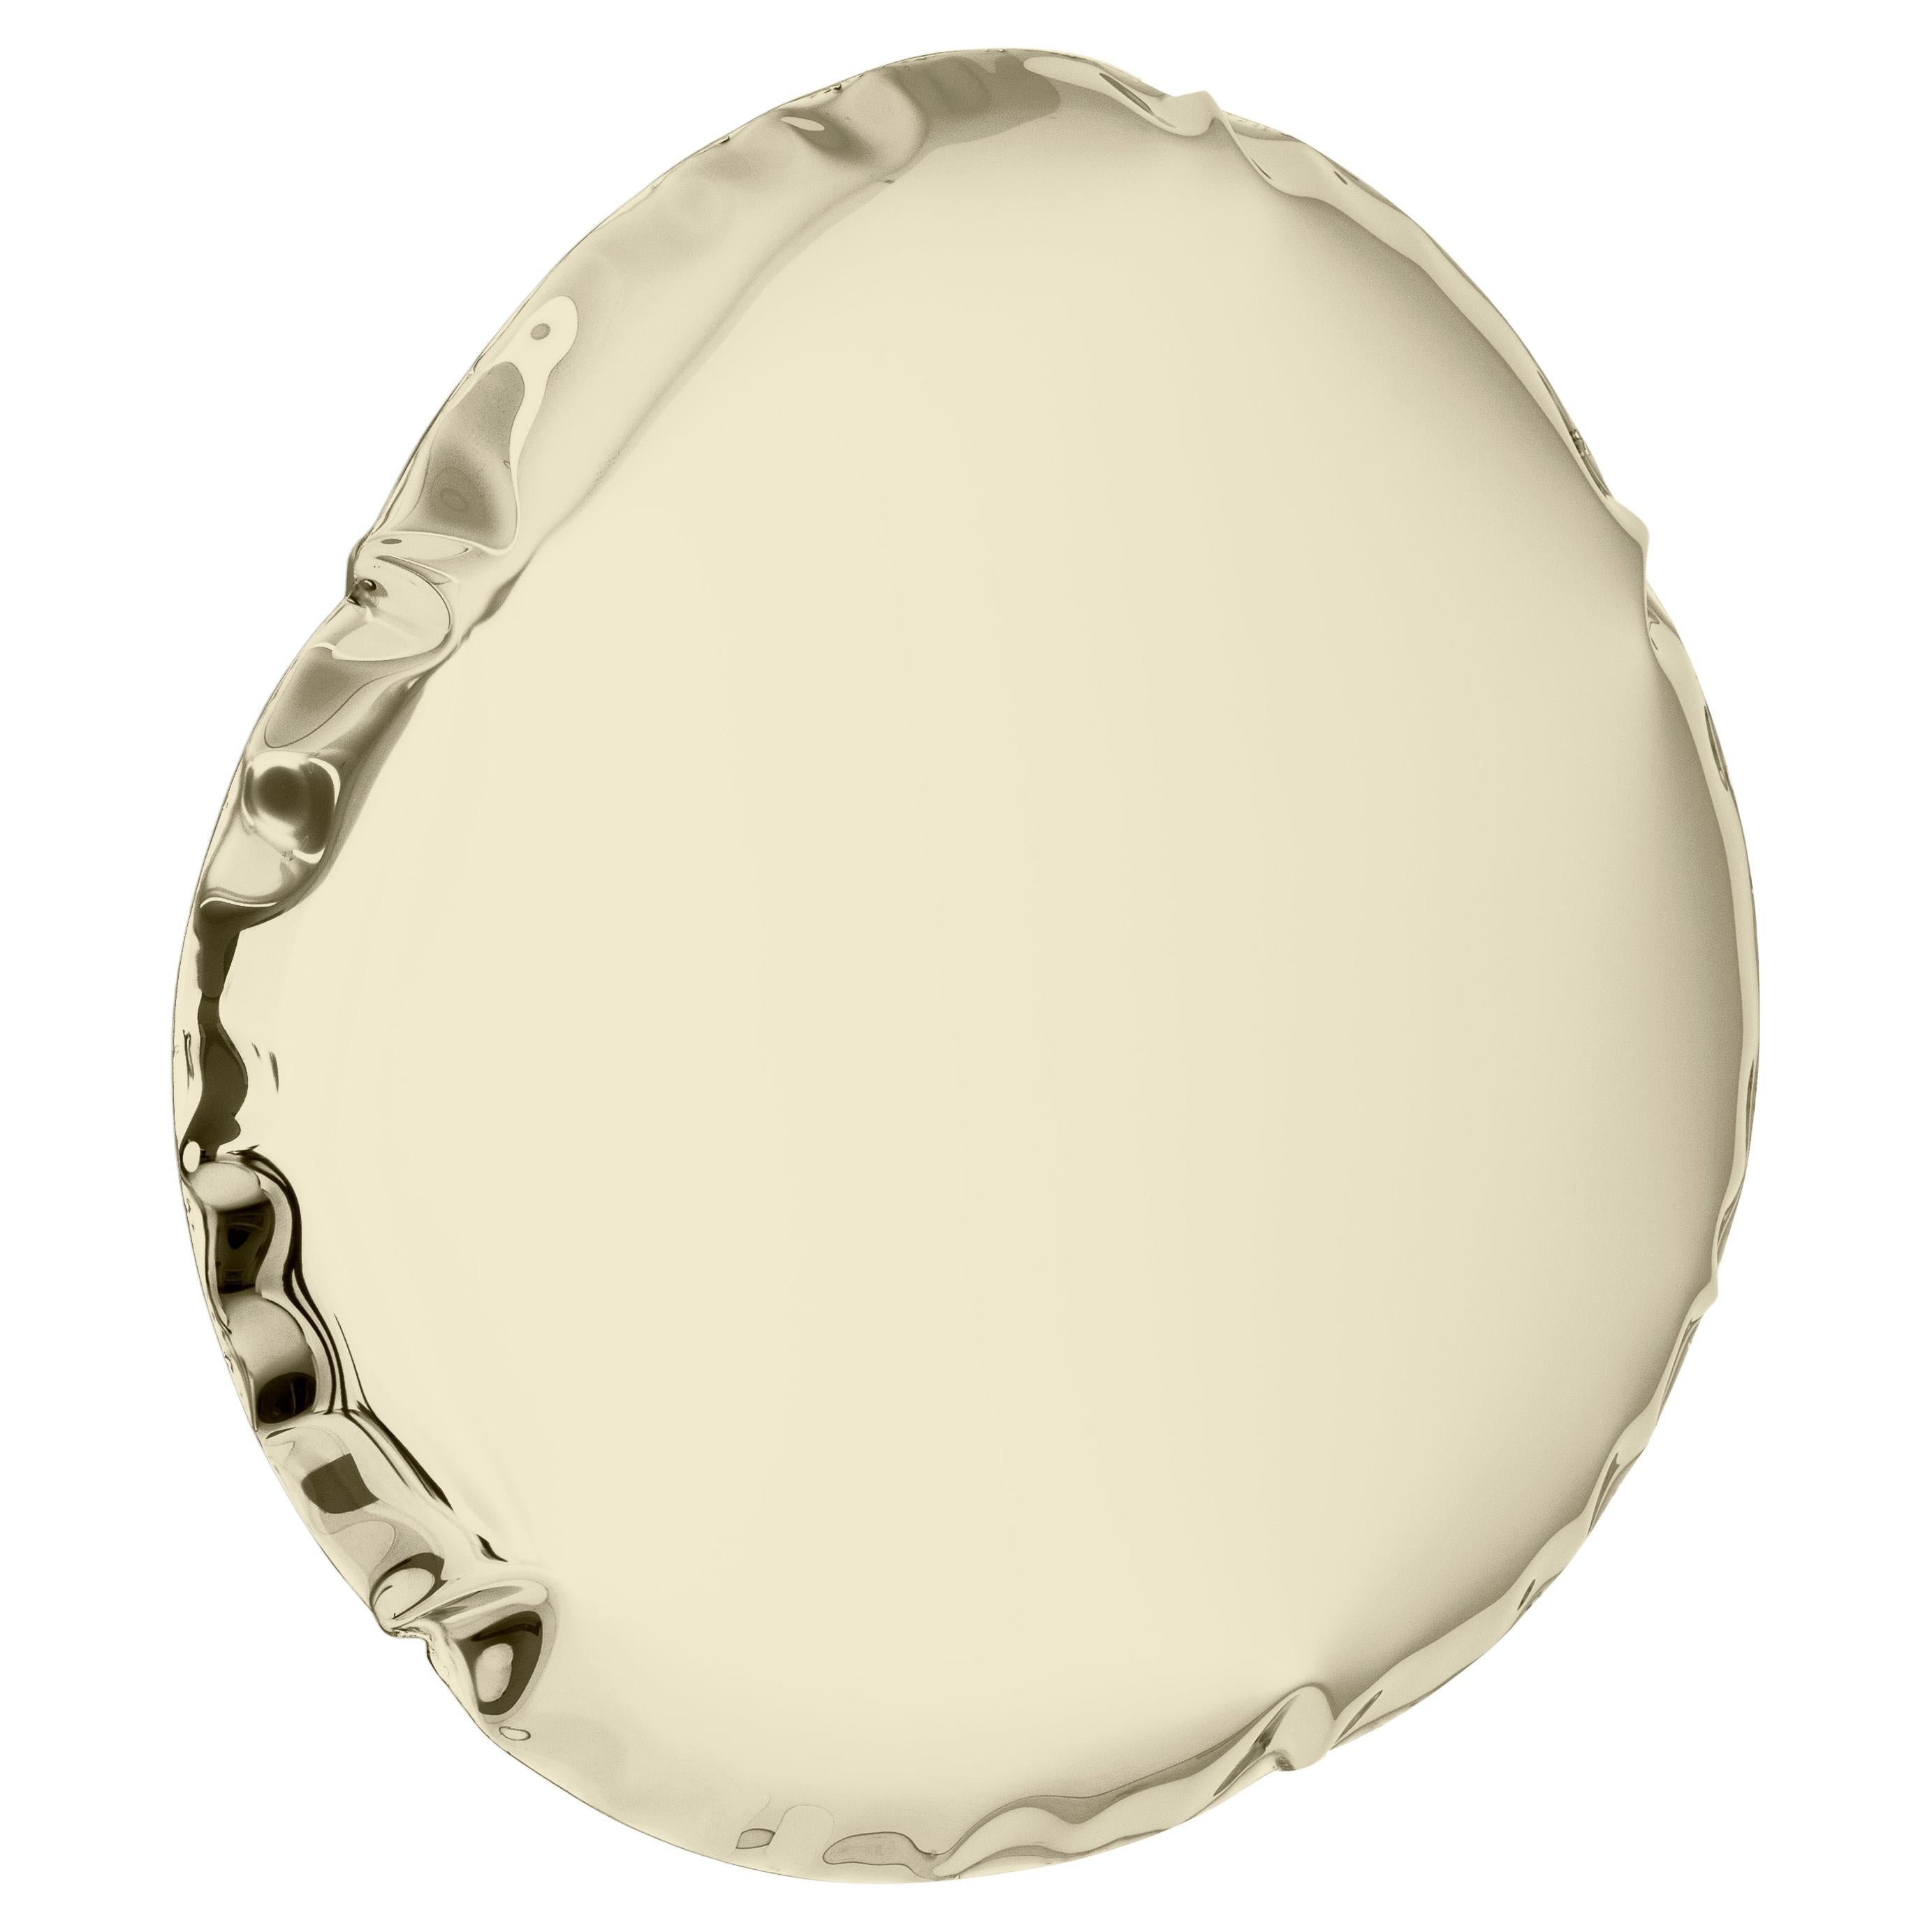 Tafla O6 Polished Stainless Steel Light Gold Color Wall Mirror by Zieta For Sale